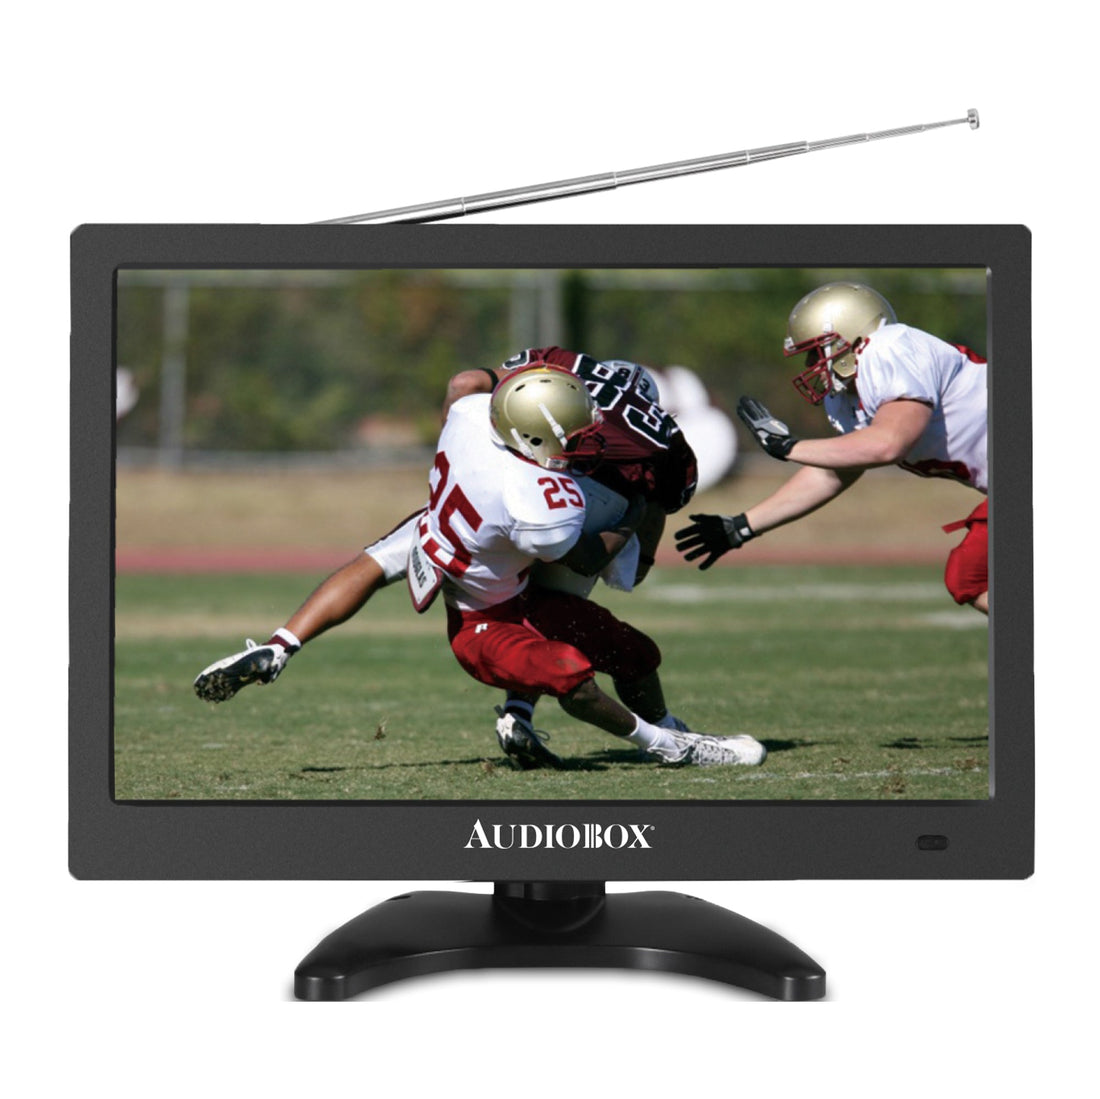 Audiobox 13&quot; Portable LCD TV with HDMI Input for RV, Outdoor, Camping, Television - Top ElectrosPortable TVTV-13810059430808